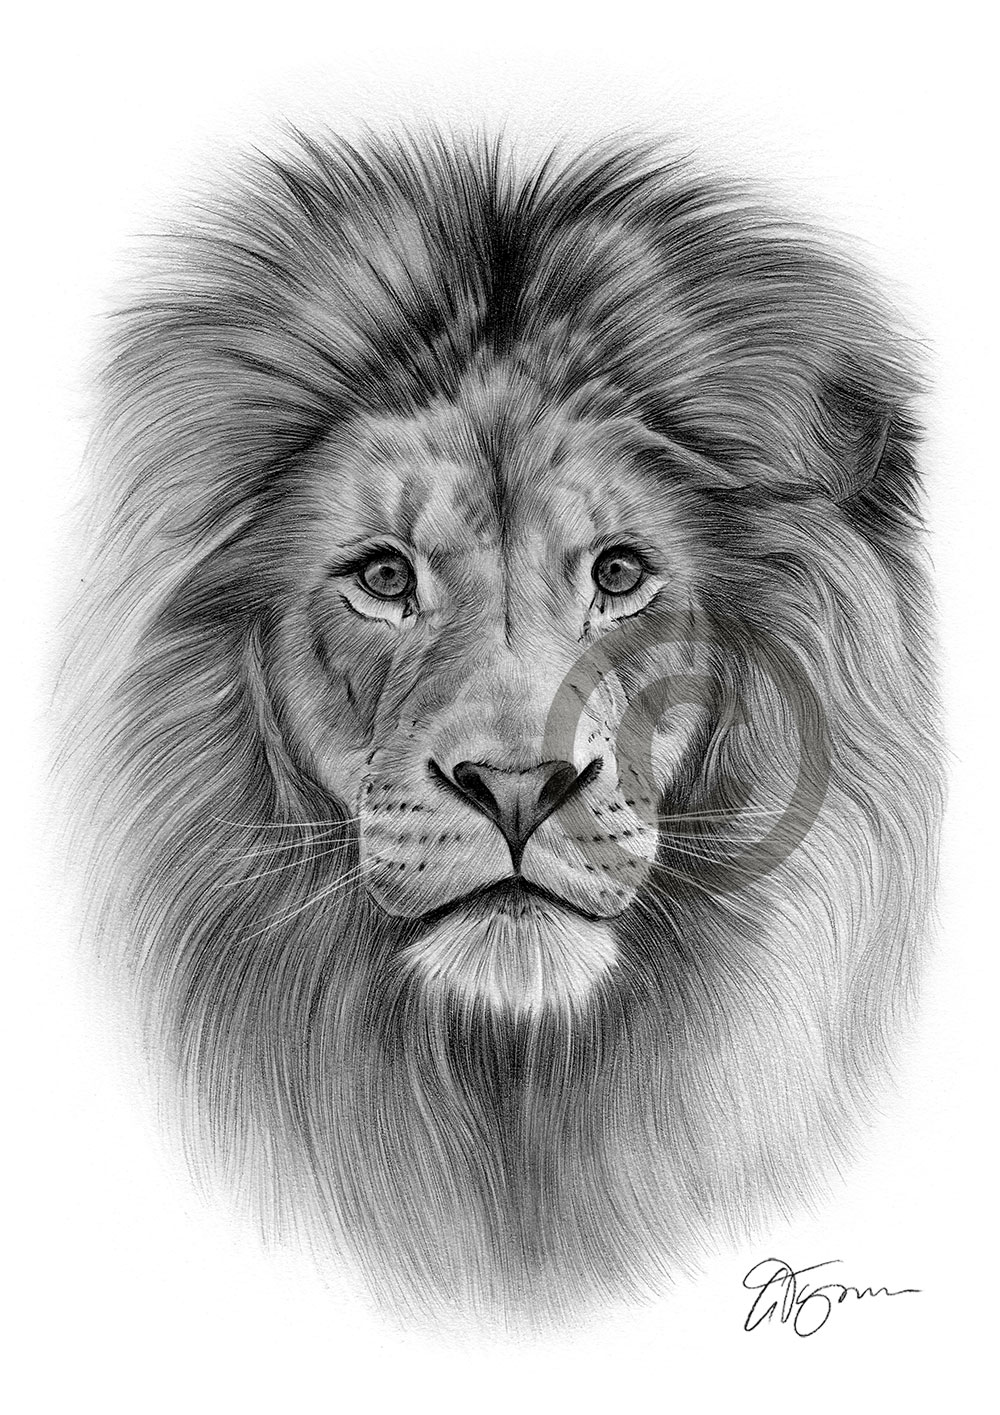 Pencil drawing of an African lion in portrait by UK artist Gary Tymon